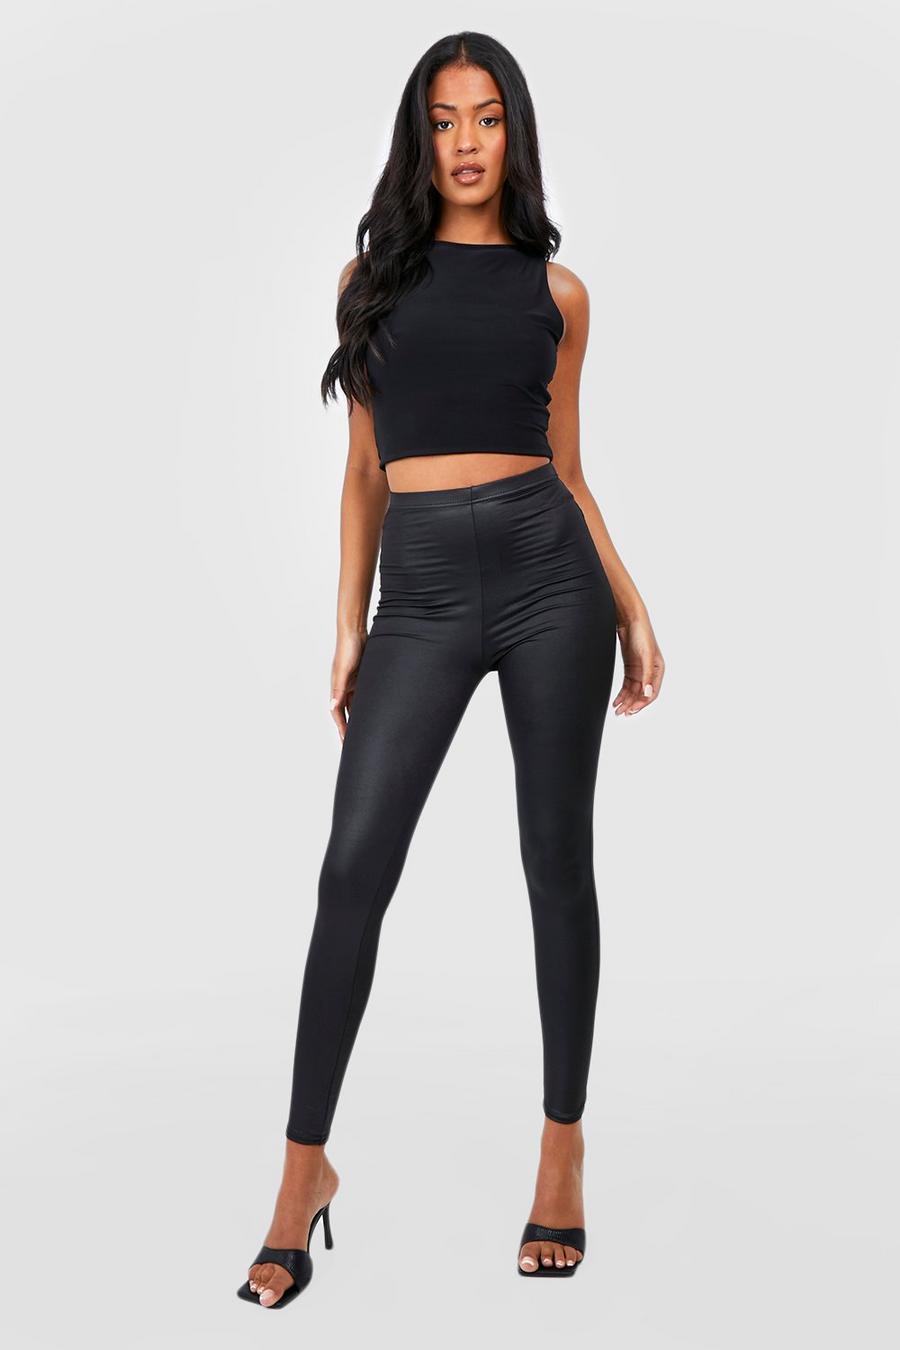 Black Tall Faux Leather High Waisted Leggings image number 1